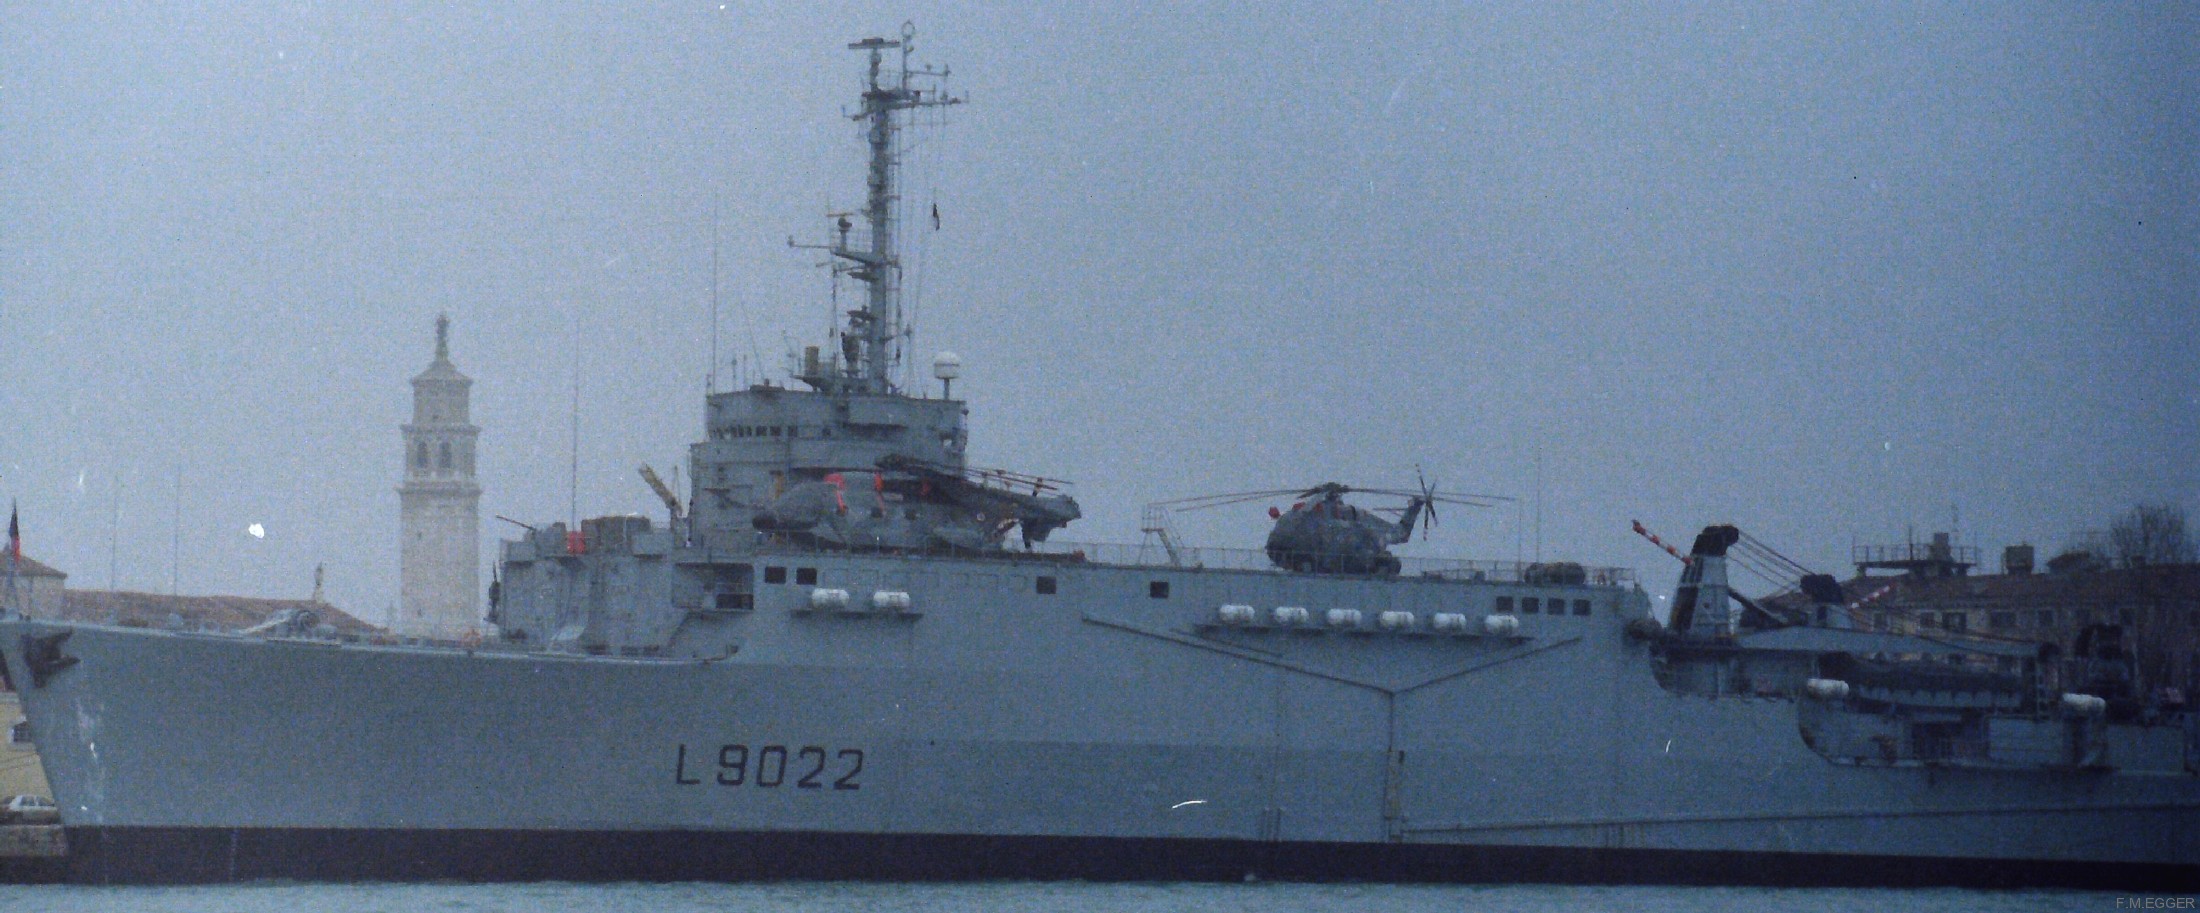 l-9022 orage ouragan class amphibious dock landing ship lpd tcd french navy marine nationale 06 venice italy